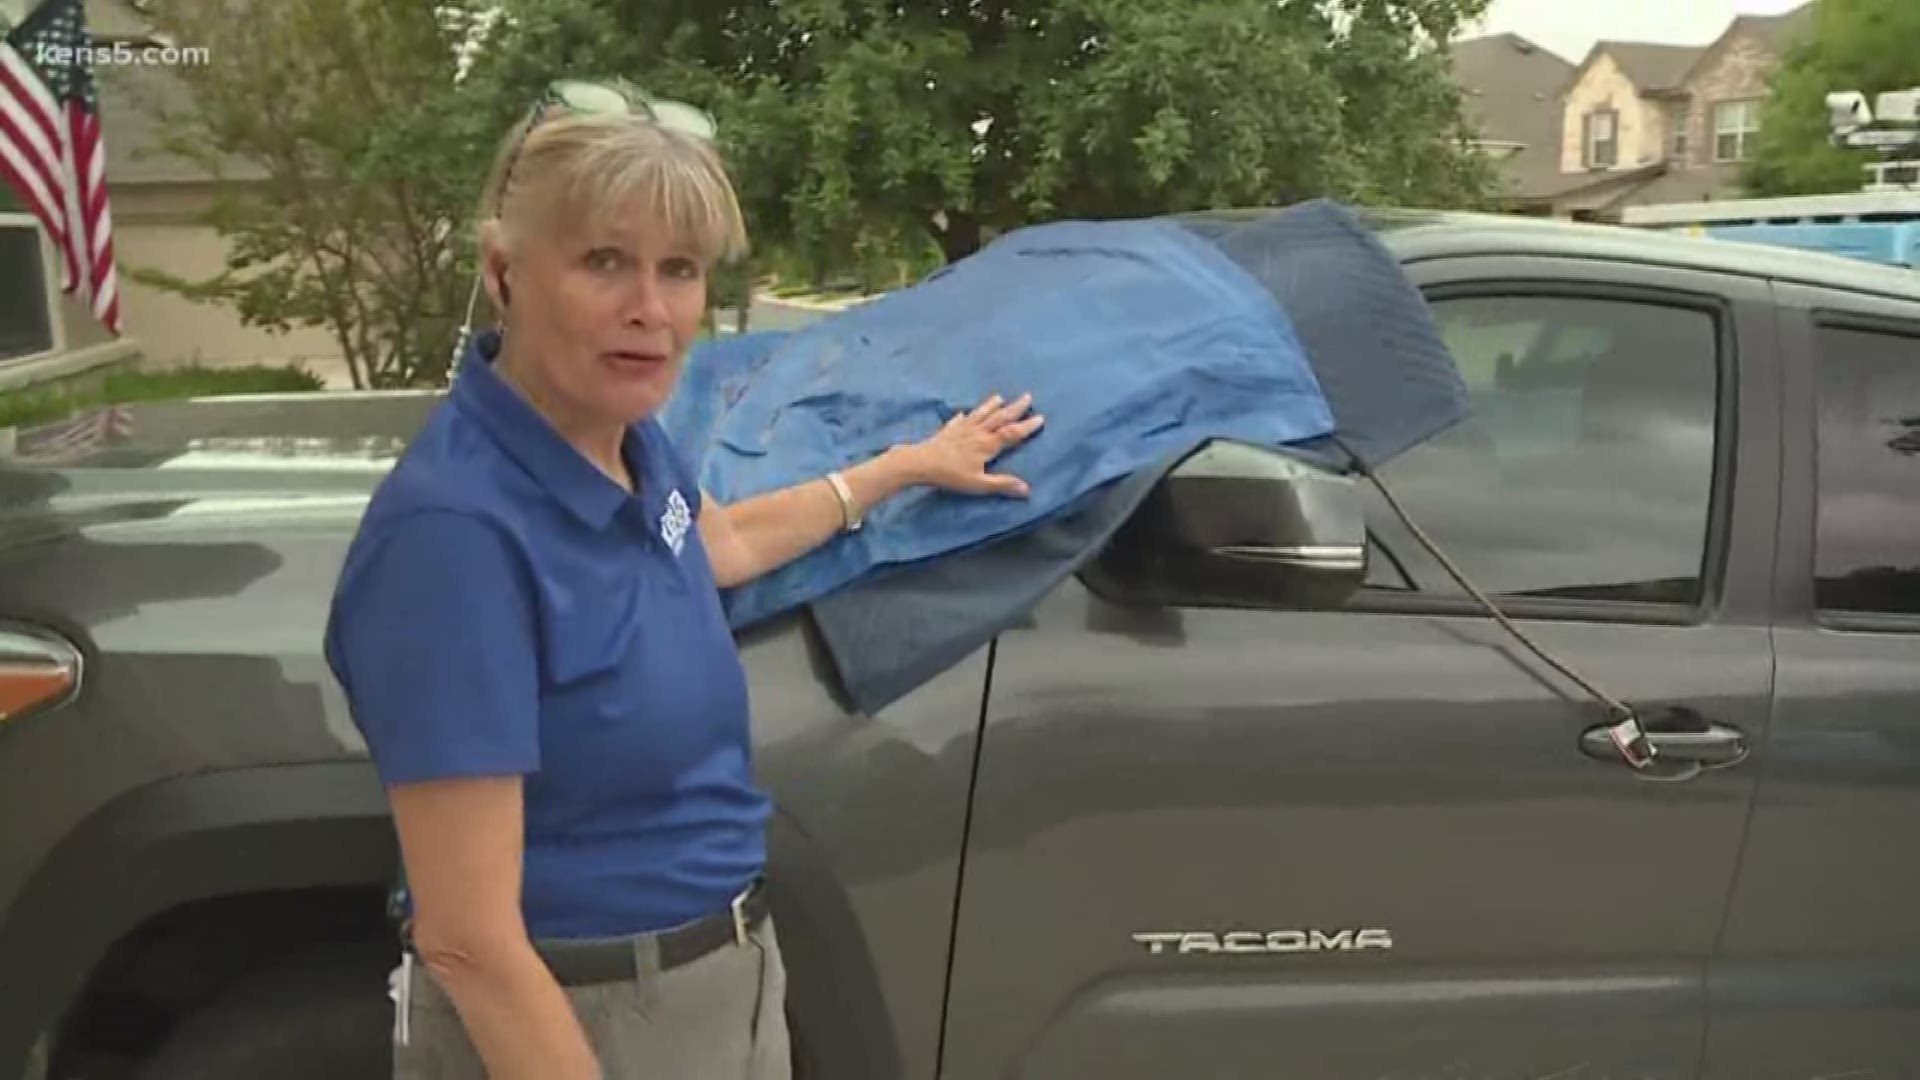 Thousands of San Antonians are still trying to recover from Saturday’s storms that left houses and cars damaged. With another severe weather threat looming for tomorrow, many people are thinking about how to save themselves from that kind of heartache.